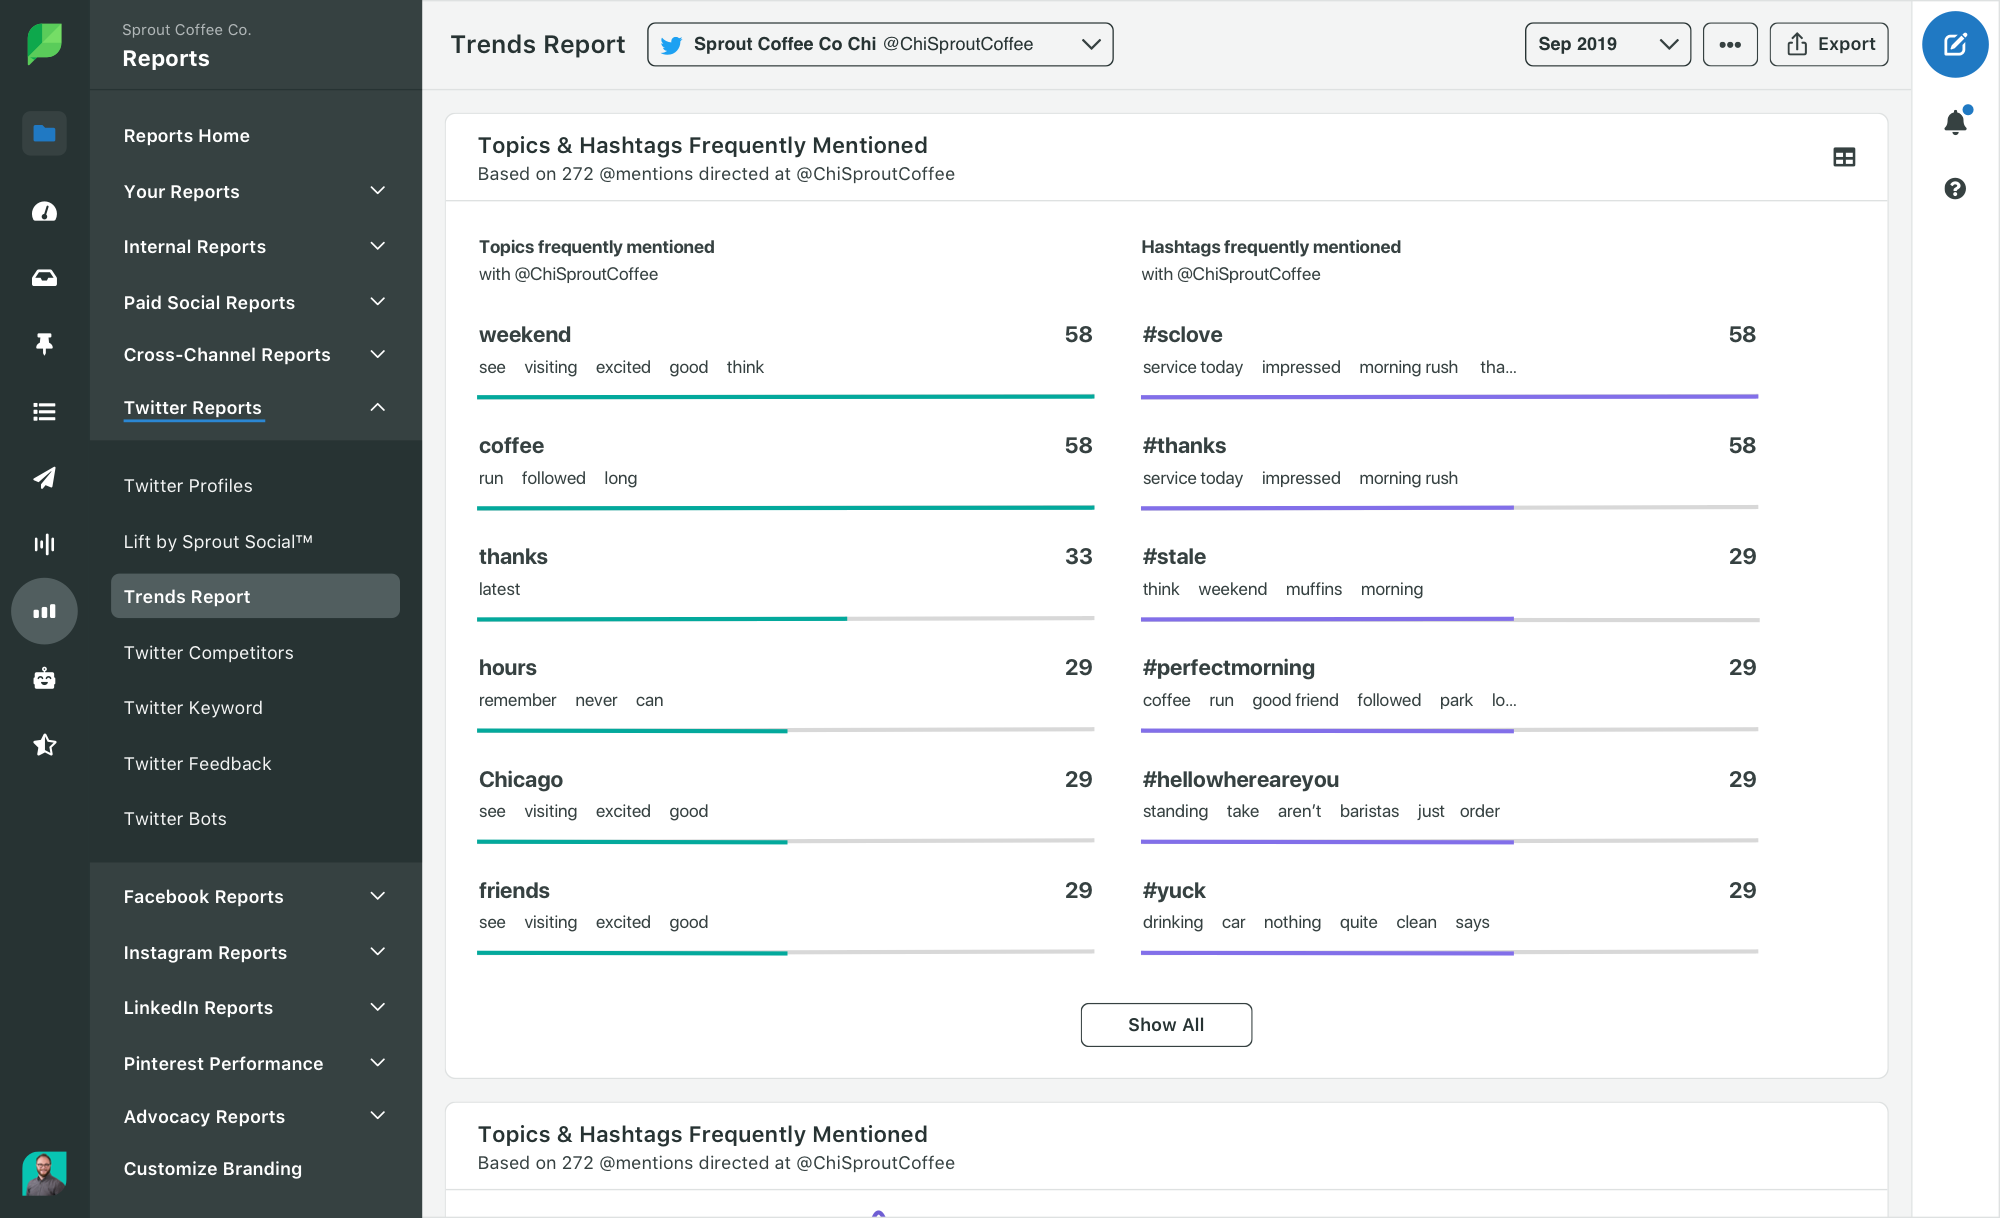 Sprout Social Twitter Trends Report displaying most frequently mentioned topics and hashtags. 